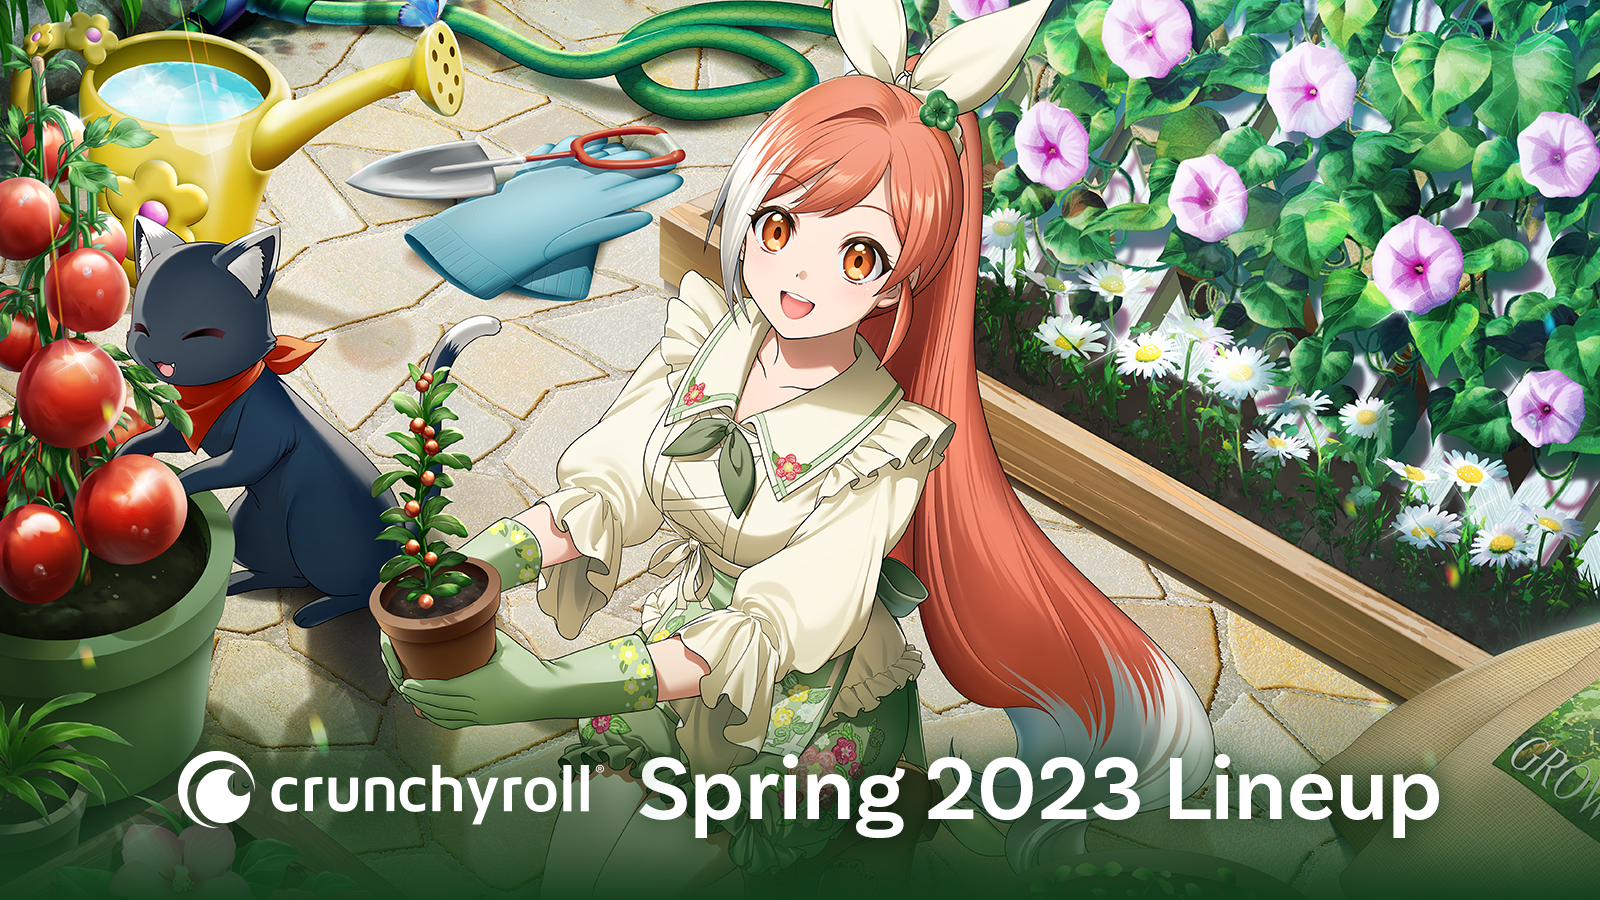 List of new animations starting in the spring of 2023 - GIGAZINE